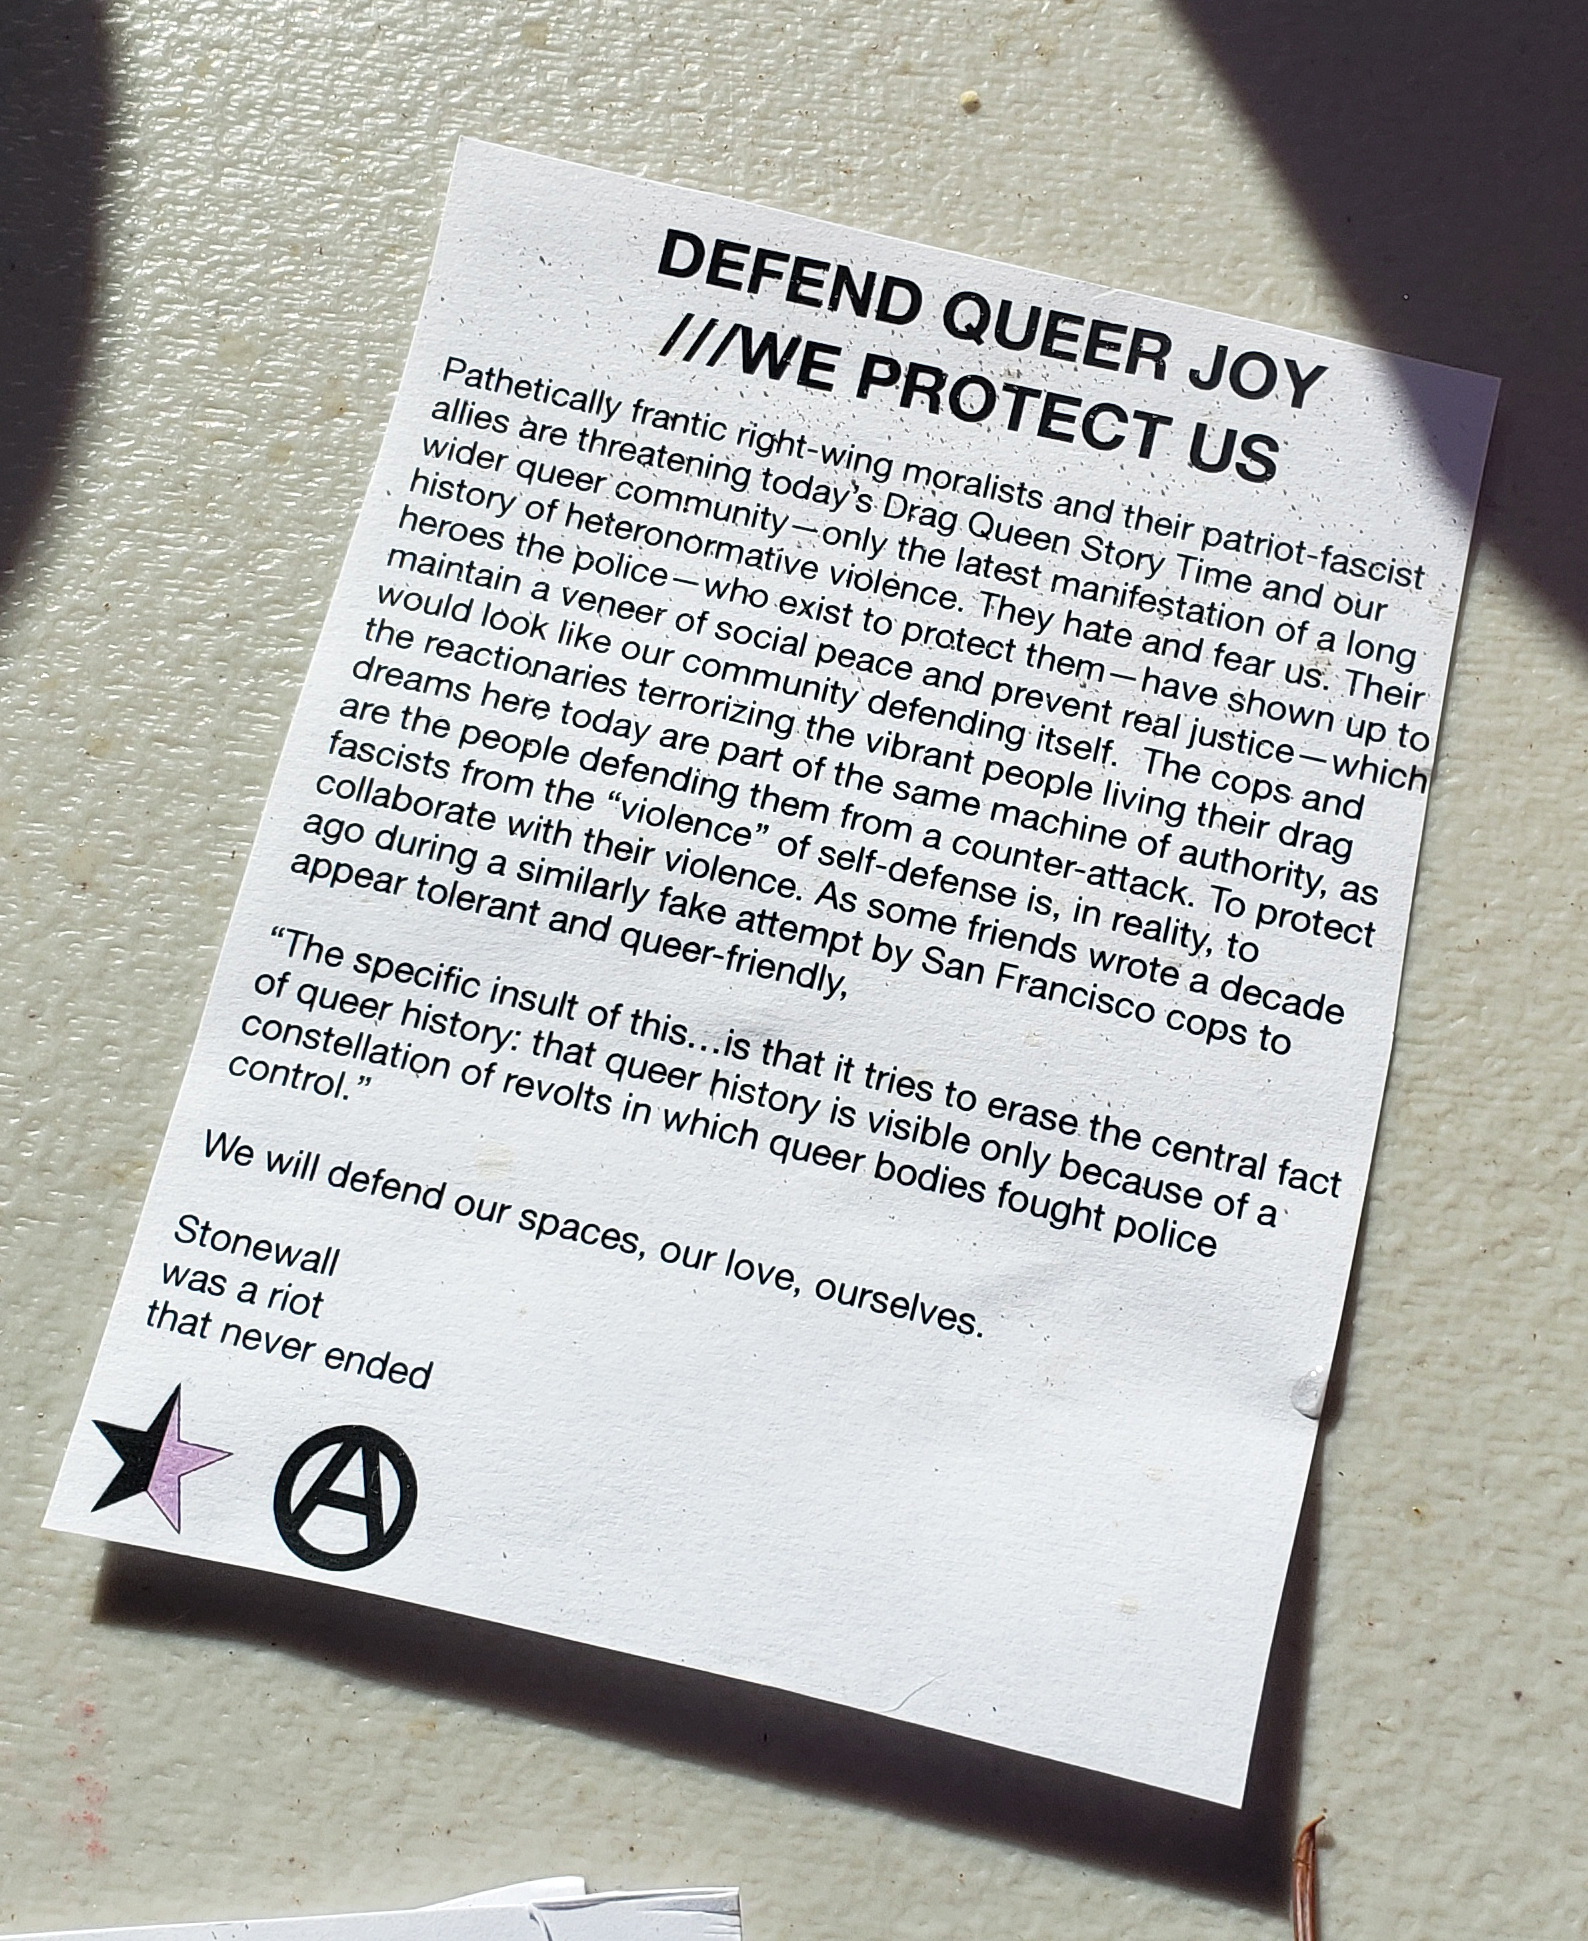 a paper handout on white paper with black text. It reads: 'DEFEND QUEER JOY  WE PROTECT US Pathetically frantic right-wing moralists and their patriot-fascist allies are threatening today's Drag Queen Story Time and our wider queer community only the latest manifestation of a long history of heteronormative violence. They hate and fear us. Their heroes the police who exist to protect them have shown up to maintain a veneer of social peace and prevent real justice which the reactionaries terrorizing the vibrant people living their drag dreams here today are part of the same machine of authority, as are the people defending them from a counter-attack. To protect fascists from the 'violence' of self-defense is, in reality, to collaborate with their violence. As some friends wrote a decade ago during a similarly fake attempt by San Francisco cops to appear tolerant and queer-friendly. 'The specific insult of this is that it tries to erase the central fact of queer history: that queer history is visible only because of a constellation of revolts in which queer bodies fought police control. We will defend our spaces, our love, ourselves. Stonewall was a riot that never ended'